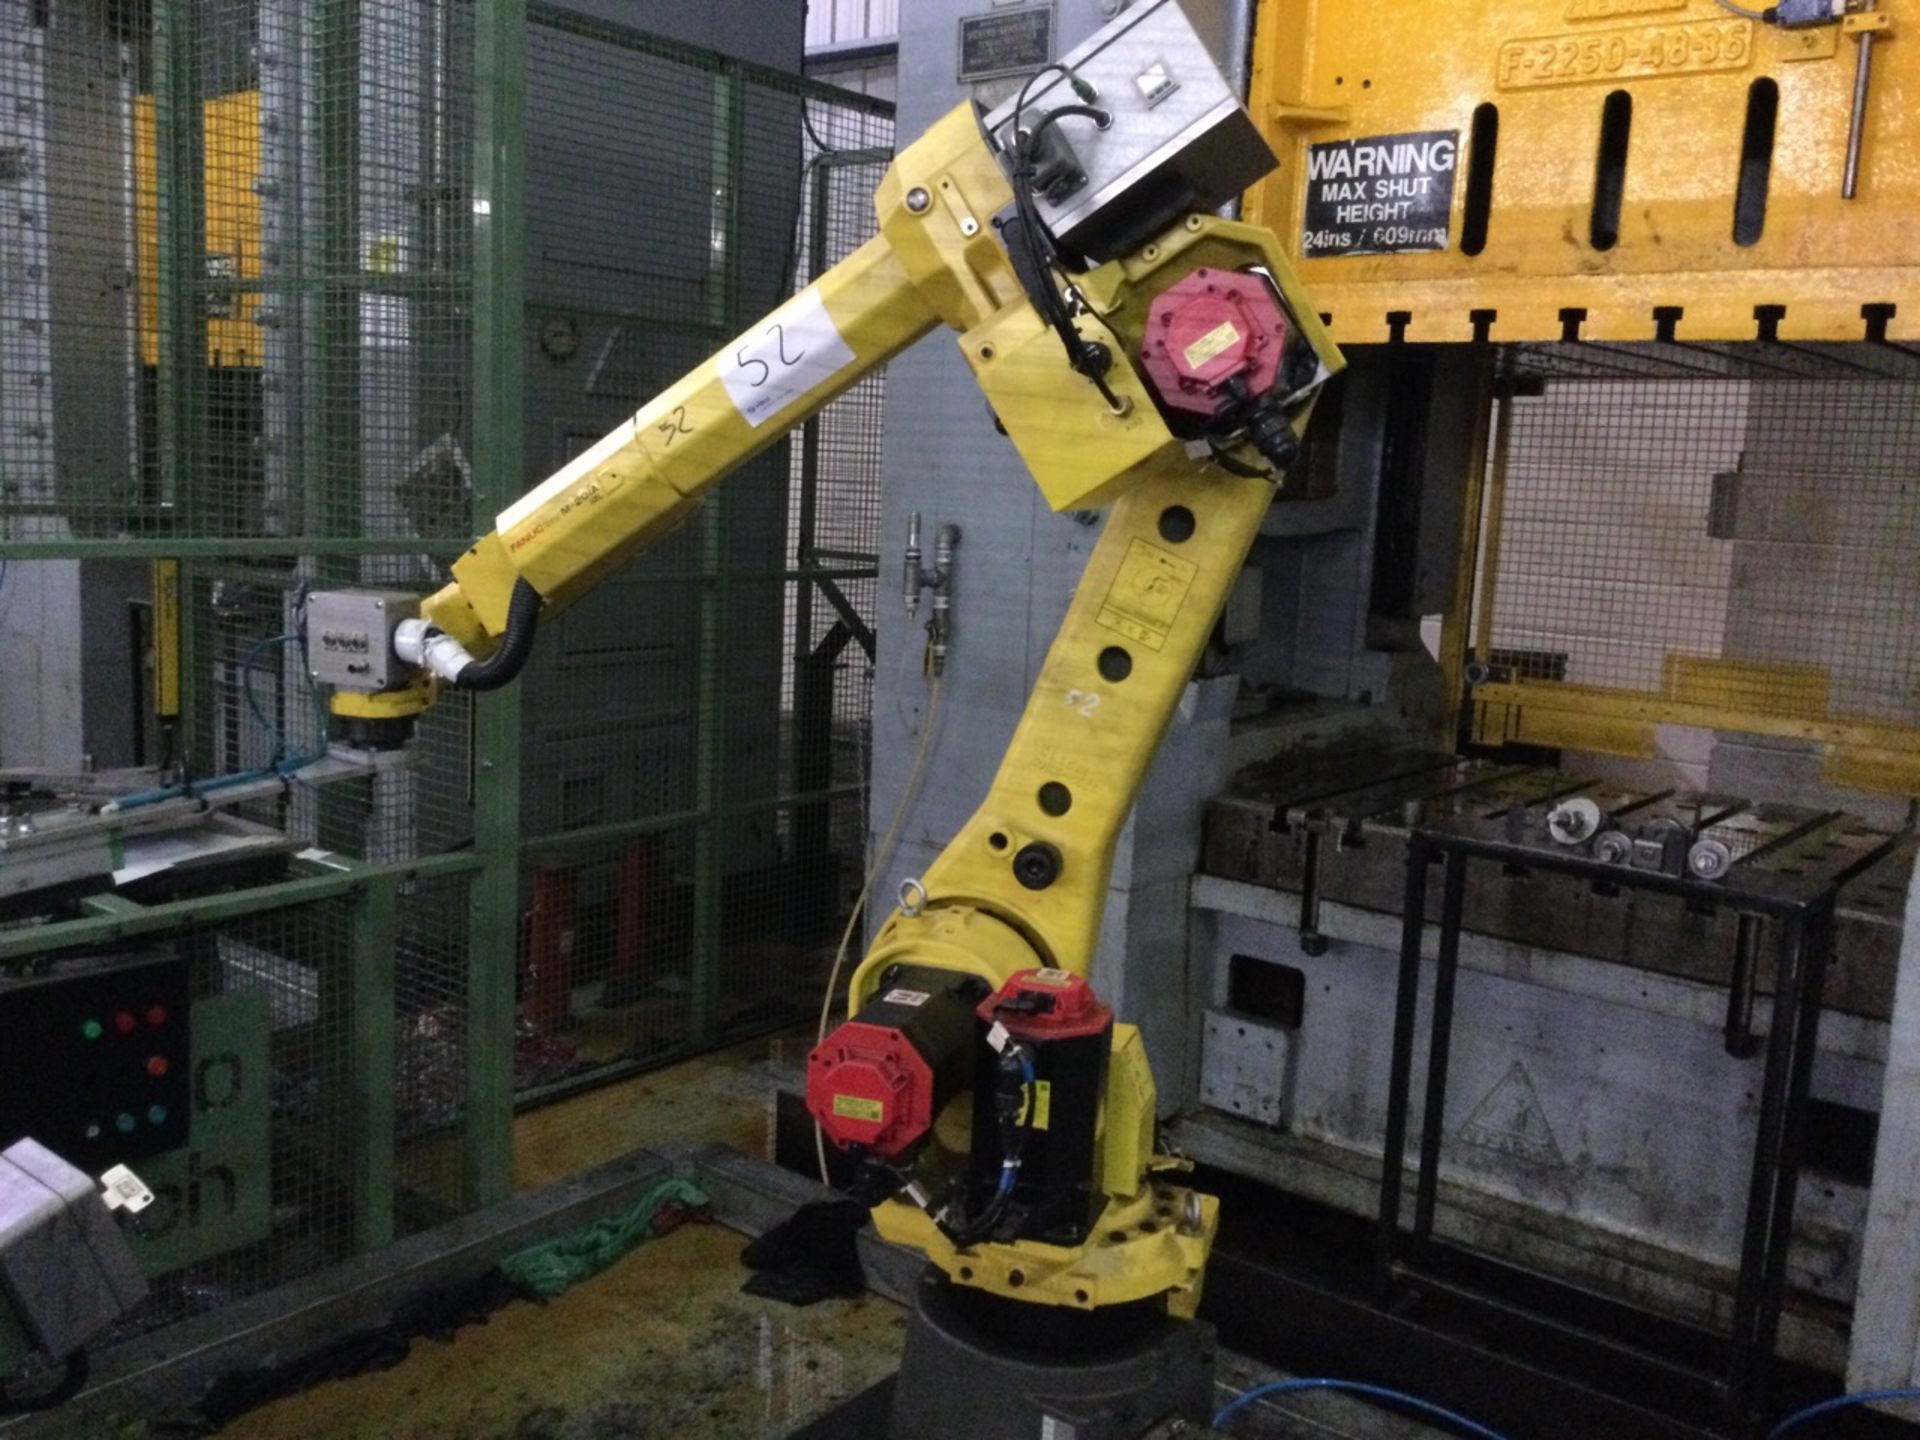 1 Fanuc , M-20iA 12L , 6-axes 12kg payload Robot, floor mounted, with Controller Model R30iB And a K